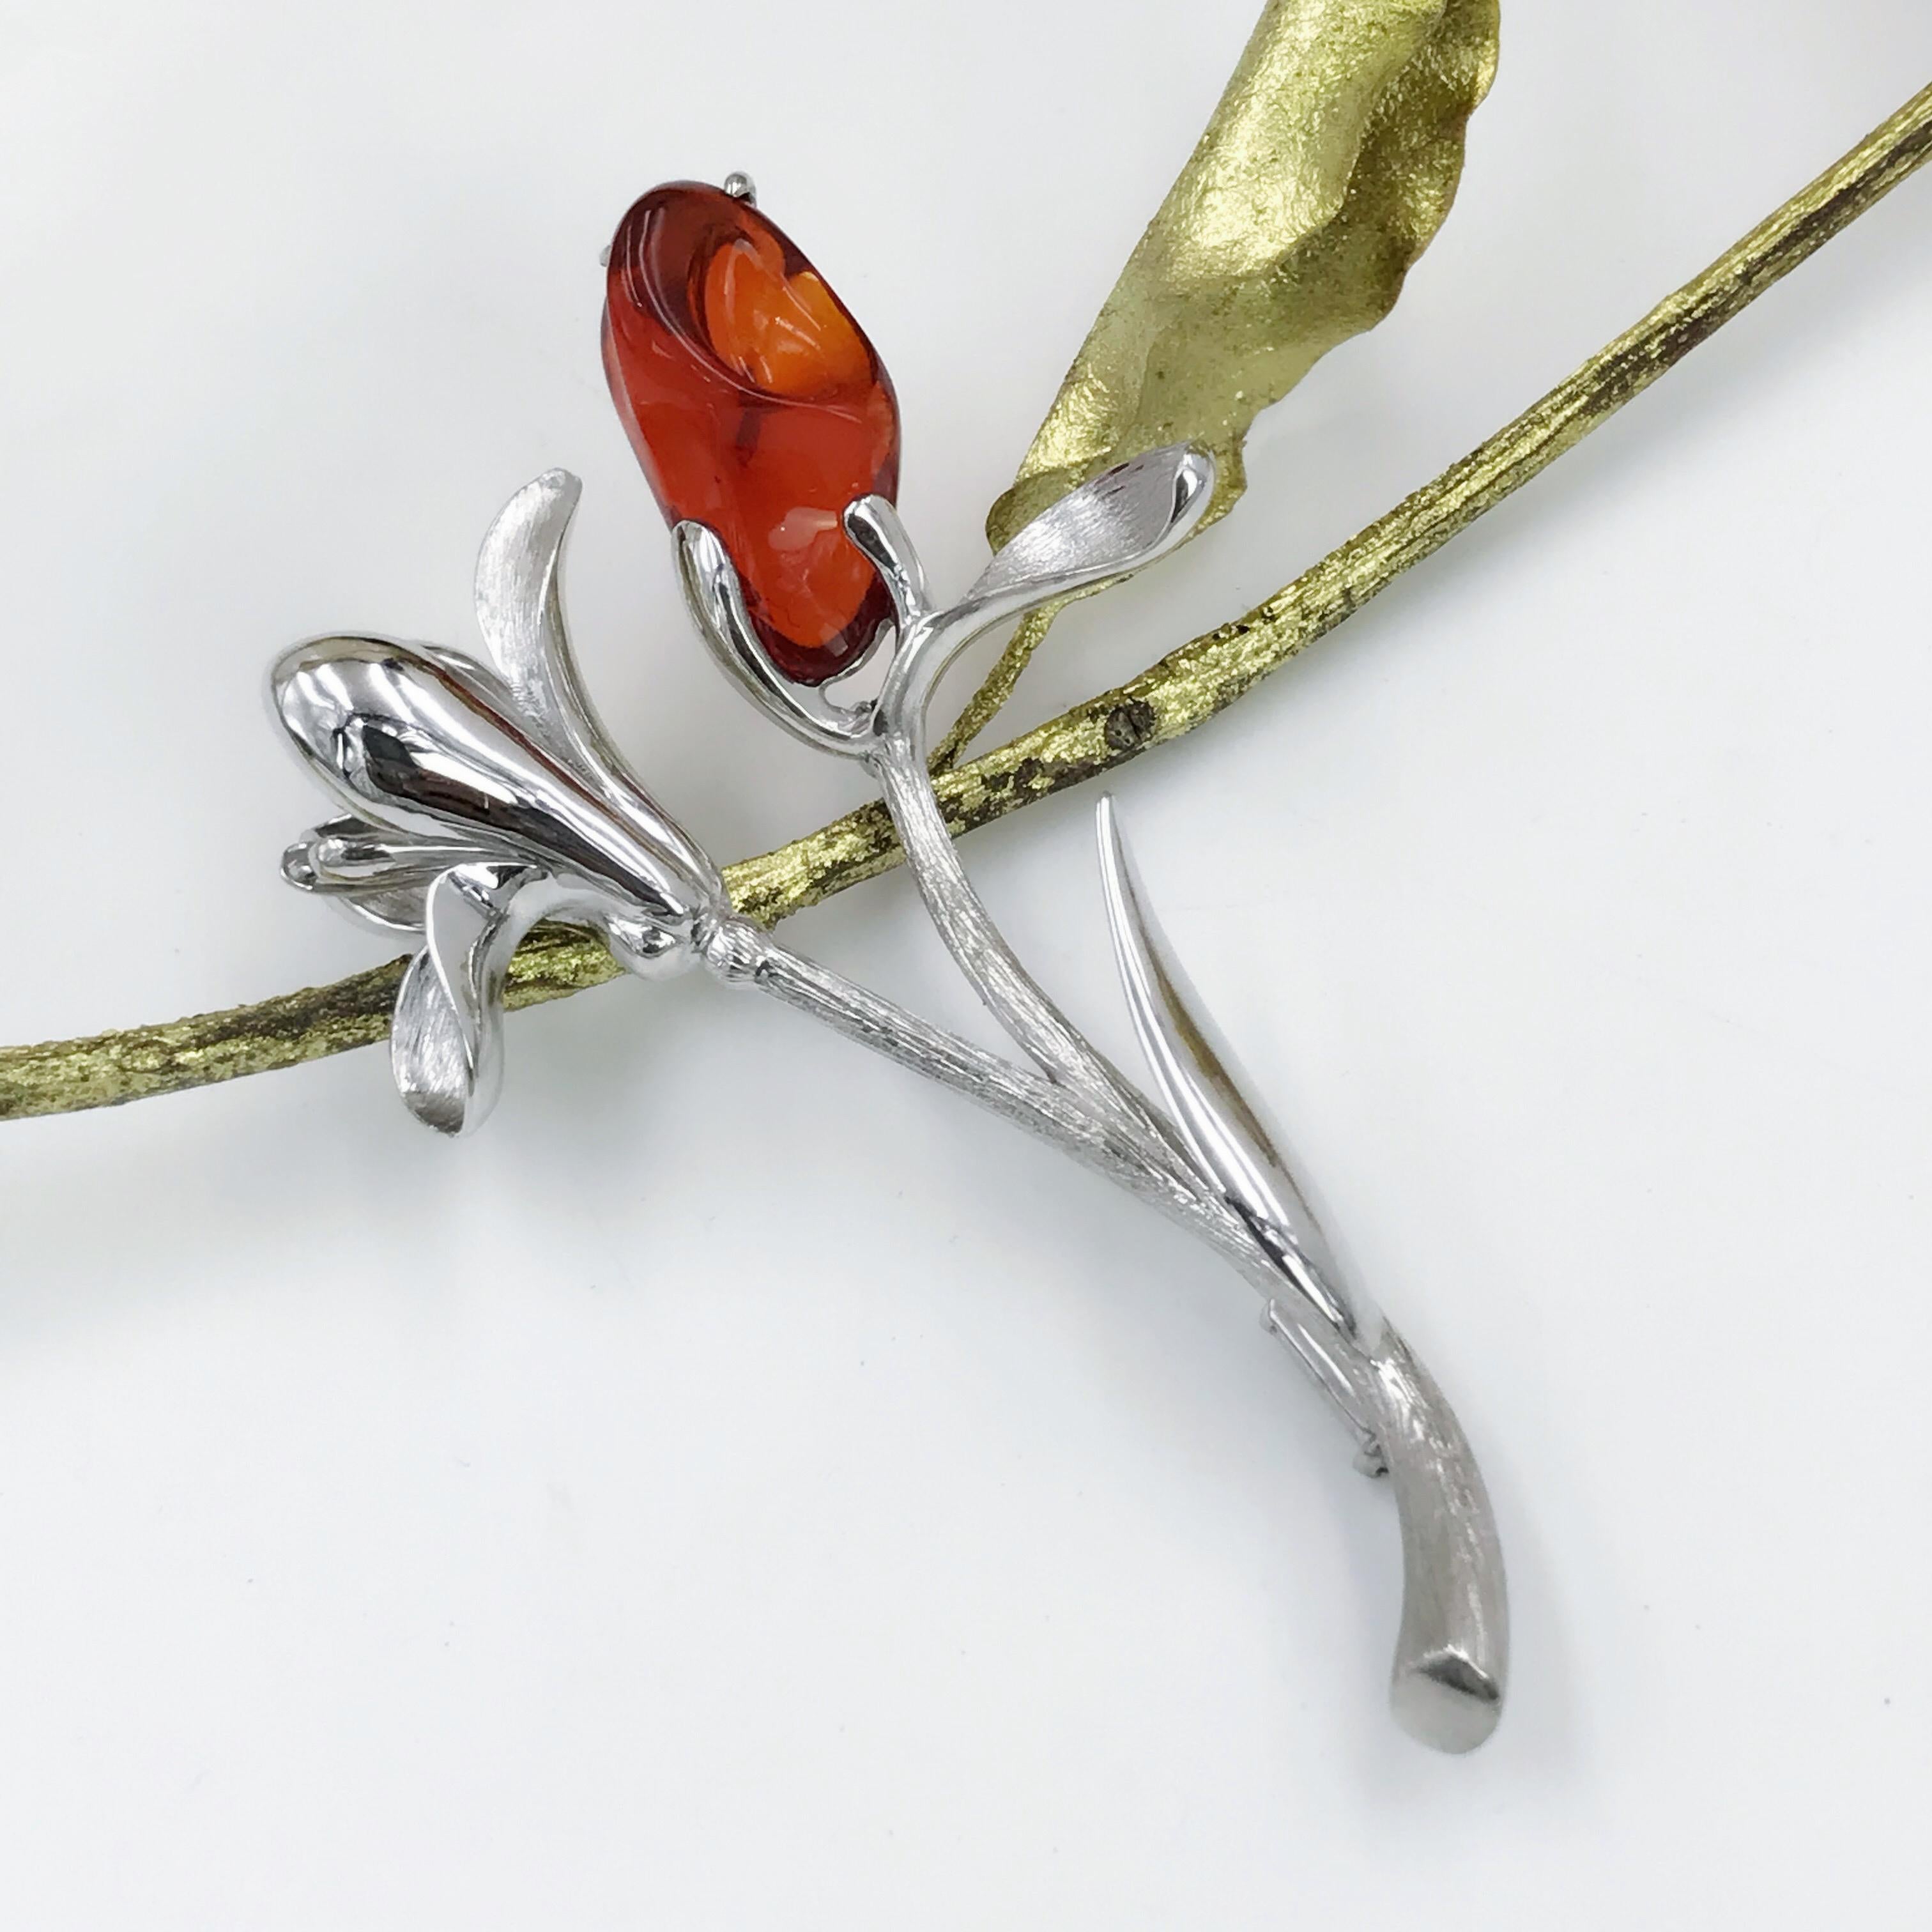 An 18 Karat white gold flower brooch. Design as a Magnolia blossom, set with a good quality fire opal, finished with brushed and polished effect. Metal is marked as 18ct gold. total length of brooch is 5.8cm. 